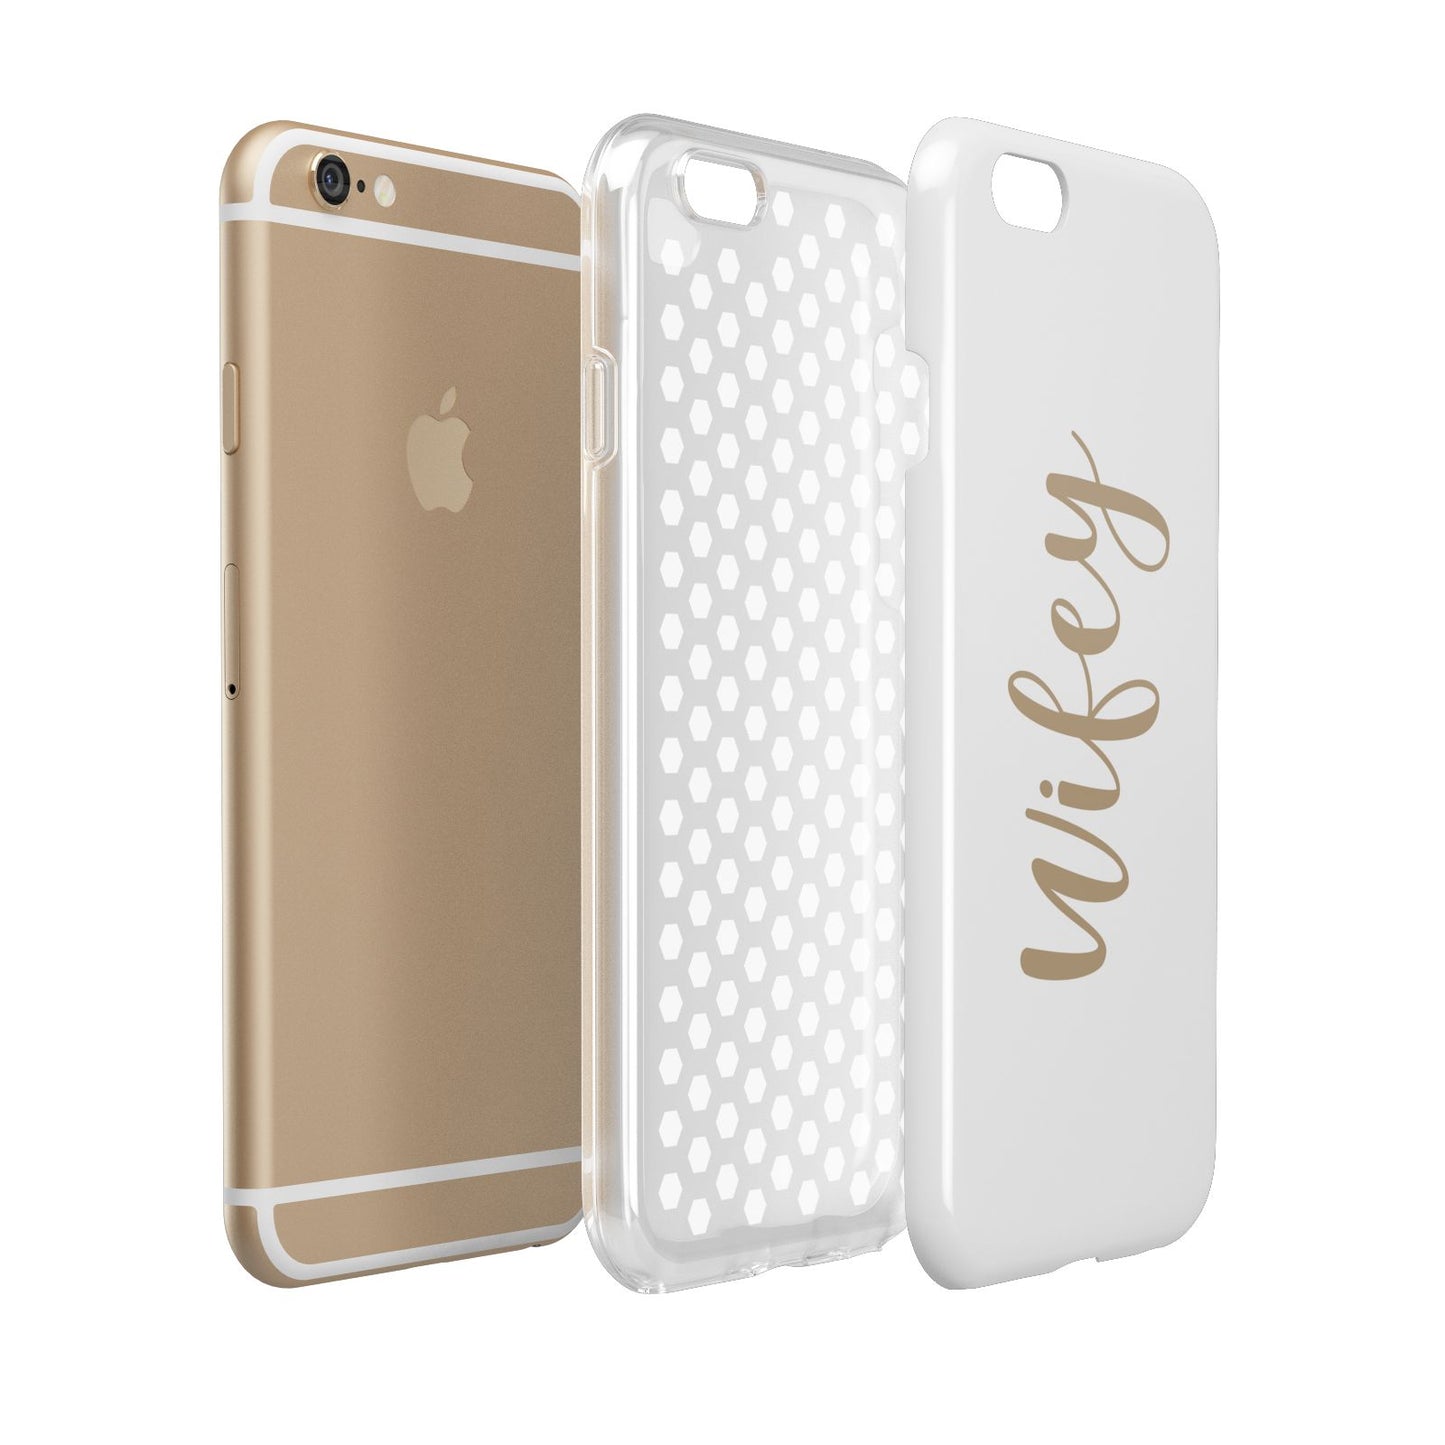 Wifey Apple iPhone 6 3D Tough Case Expanded view